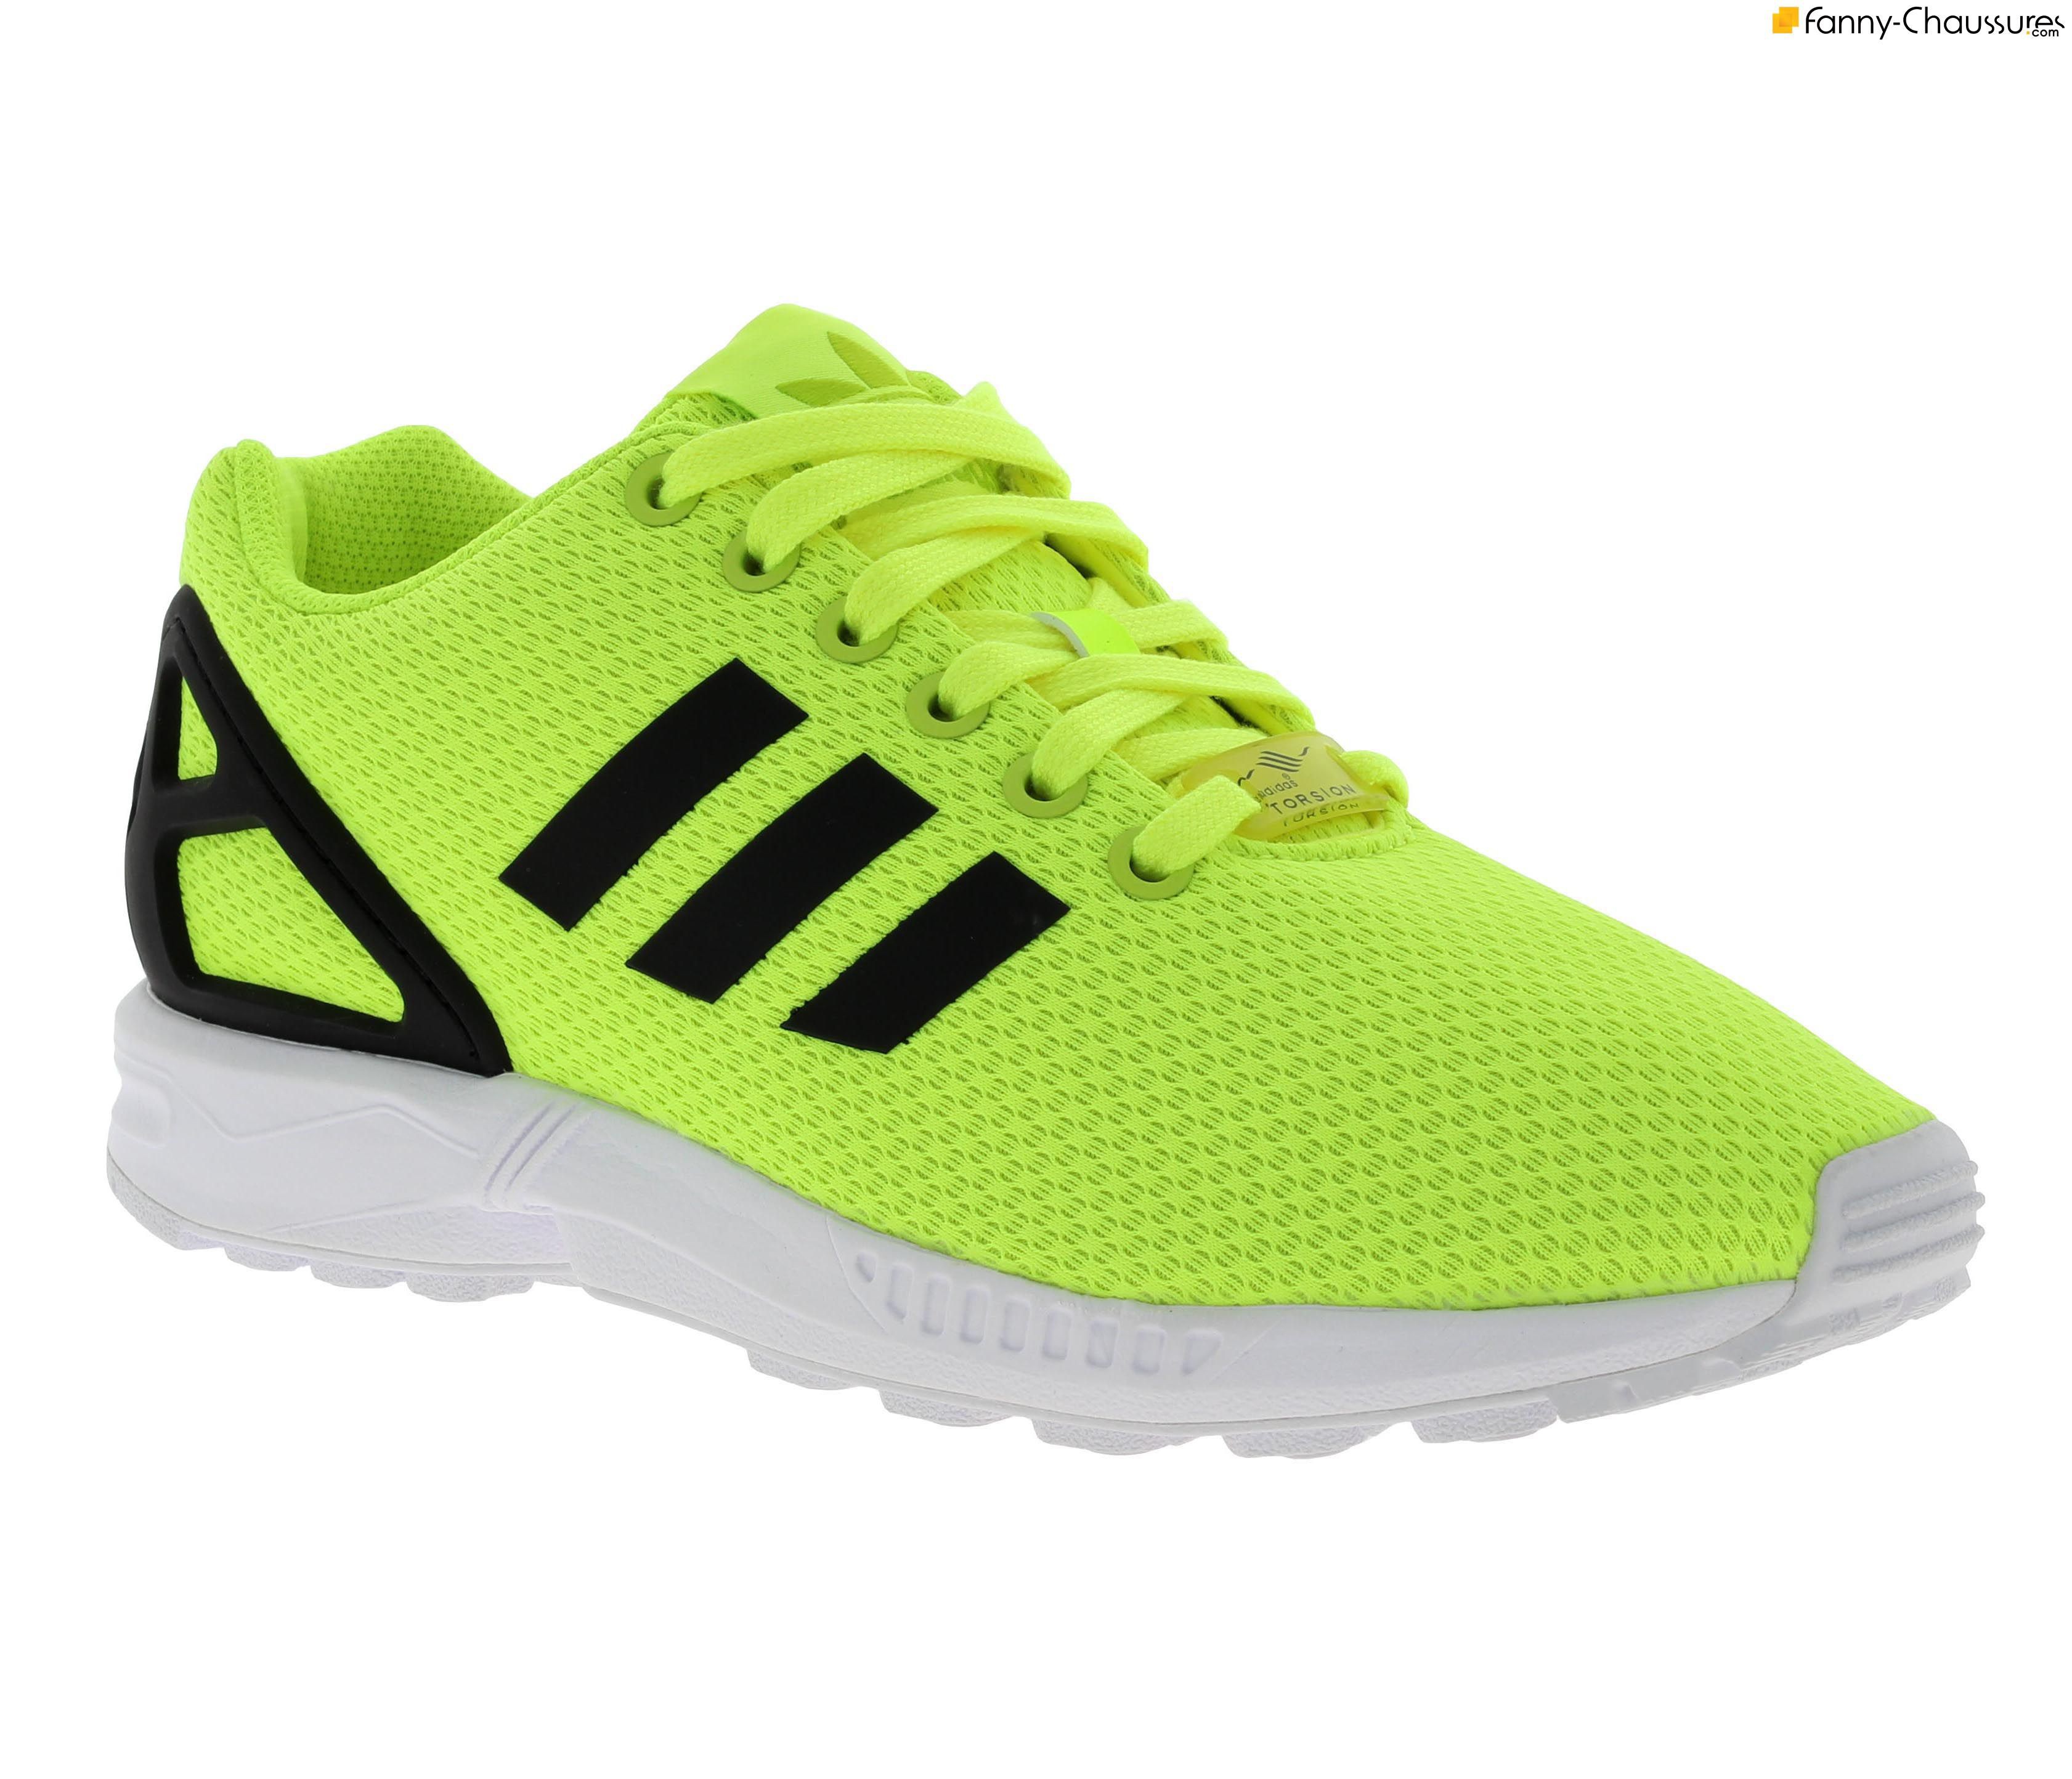 adidas zx 650 homme 2015